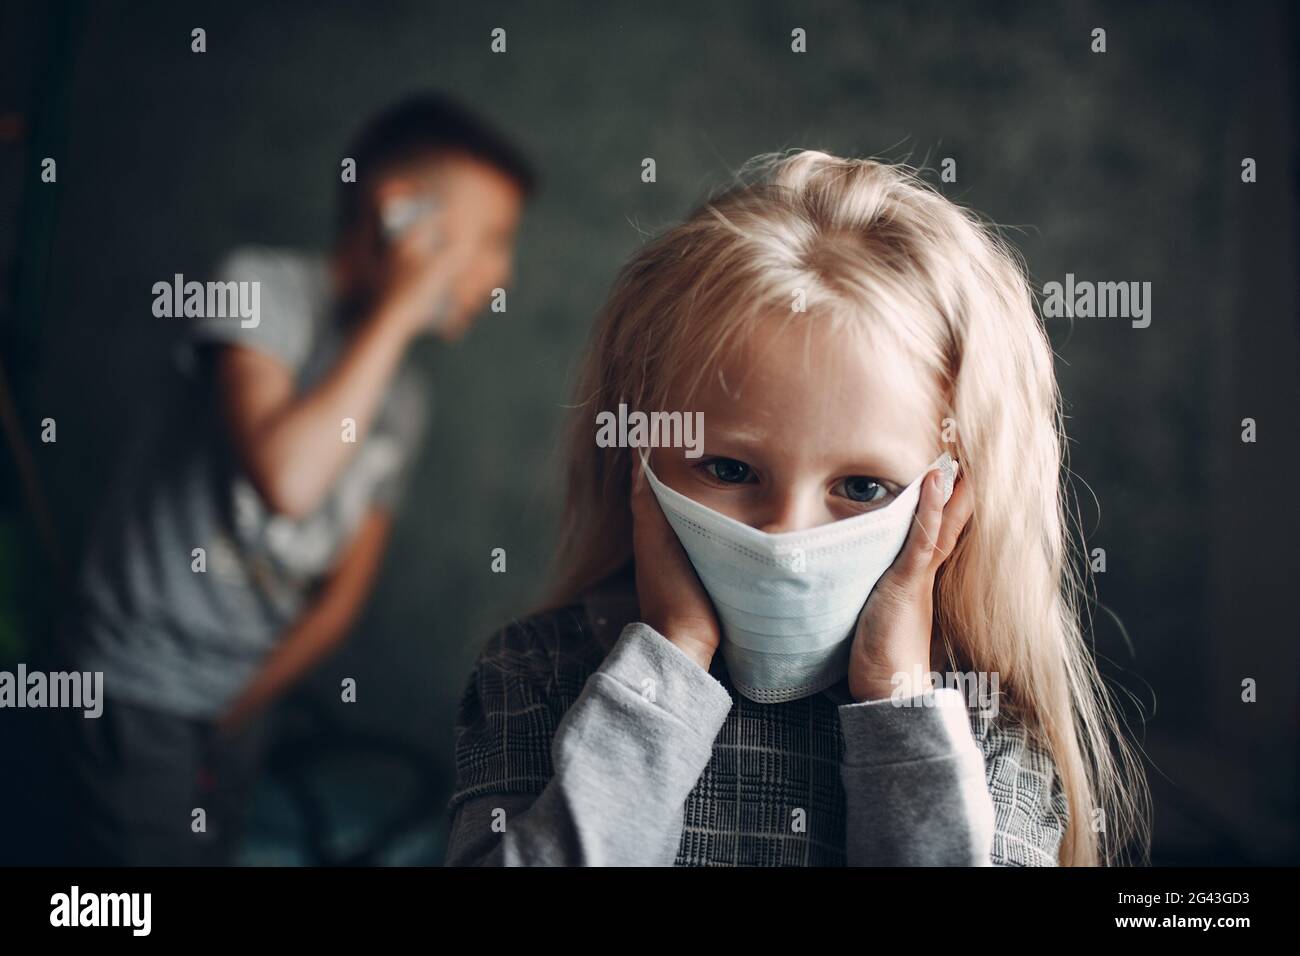 Portrait of little girl wearing medical face mask, virus protection concept. Stock Photo